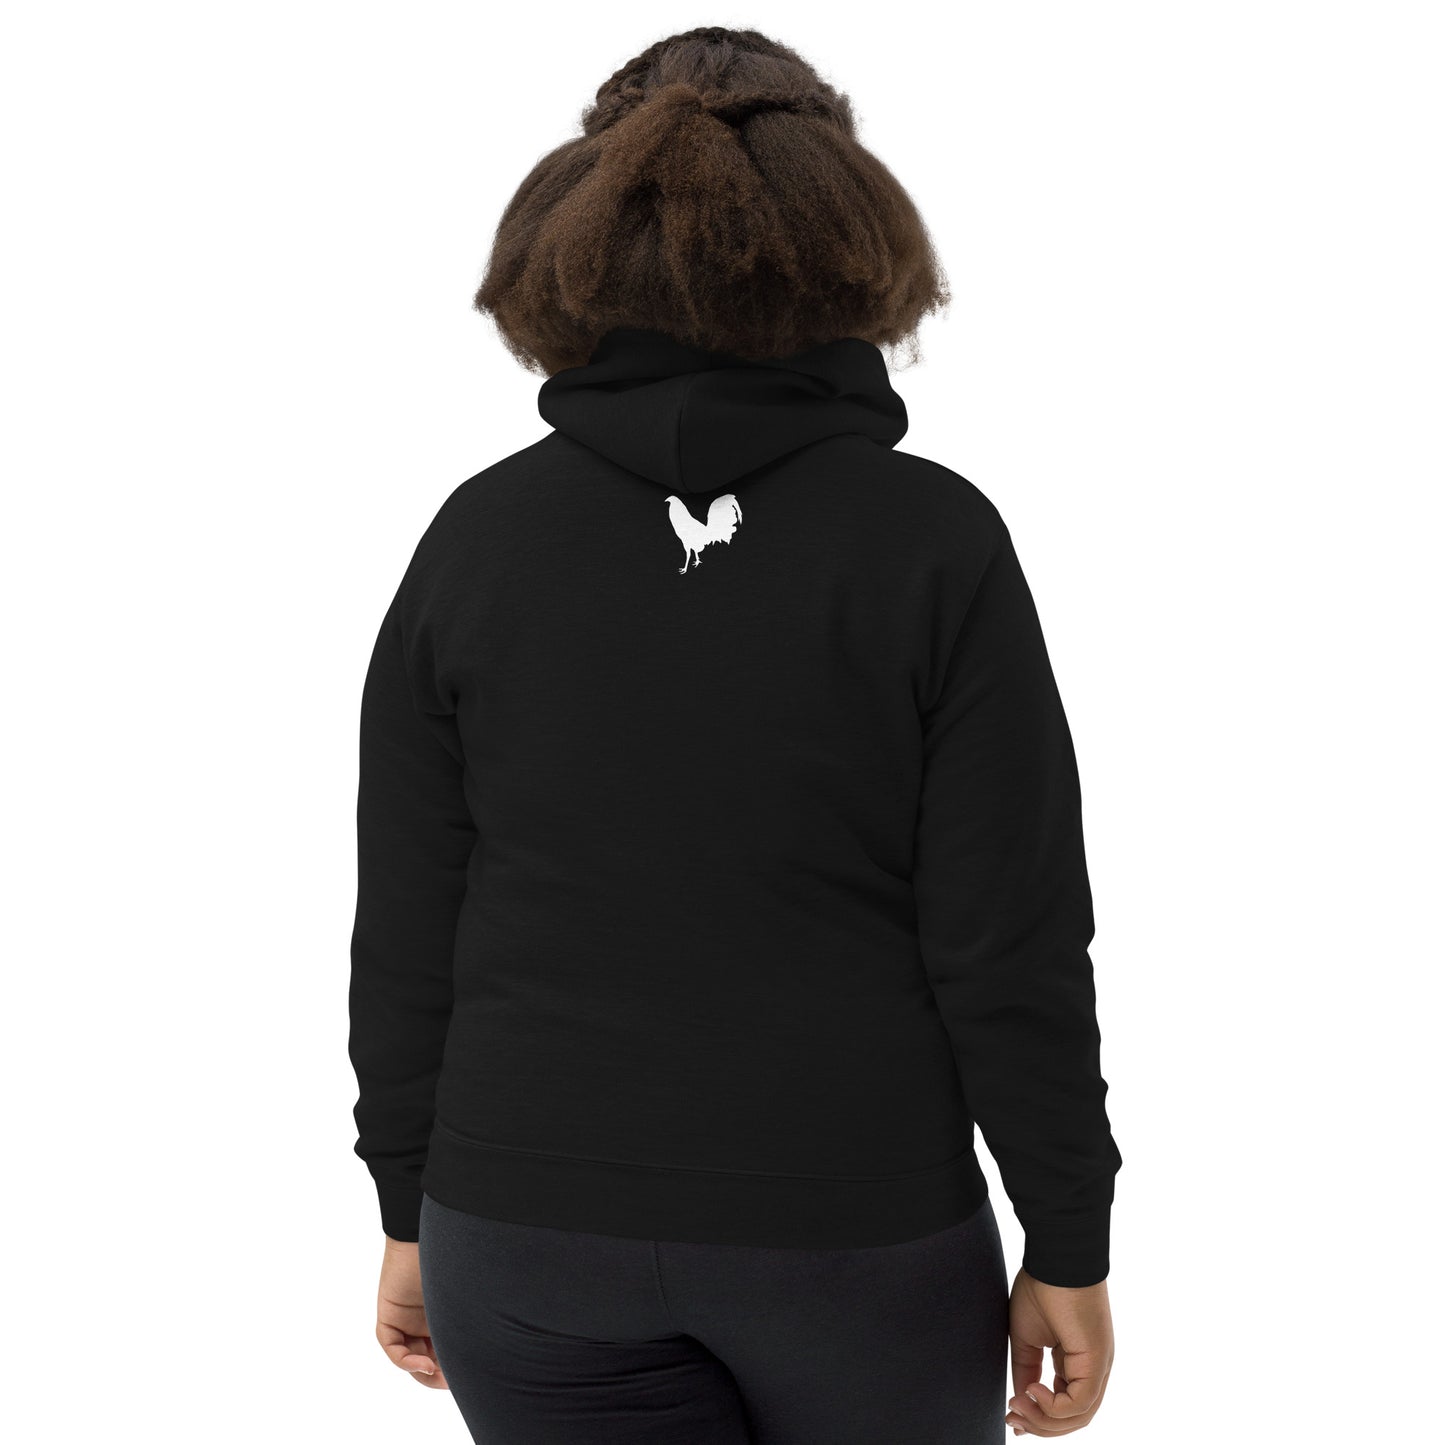 Youth COMIC STRUNG 4-0 Gamefowl Rooster Hoodie